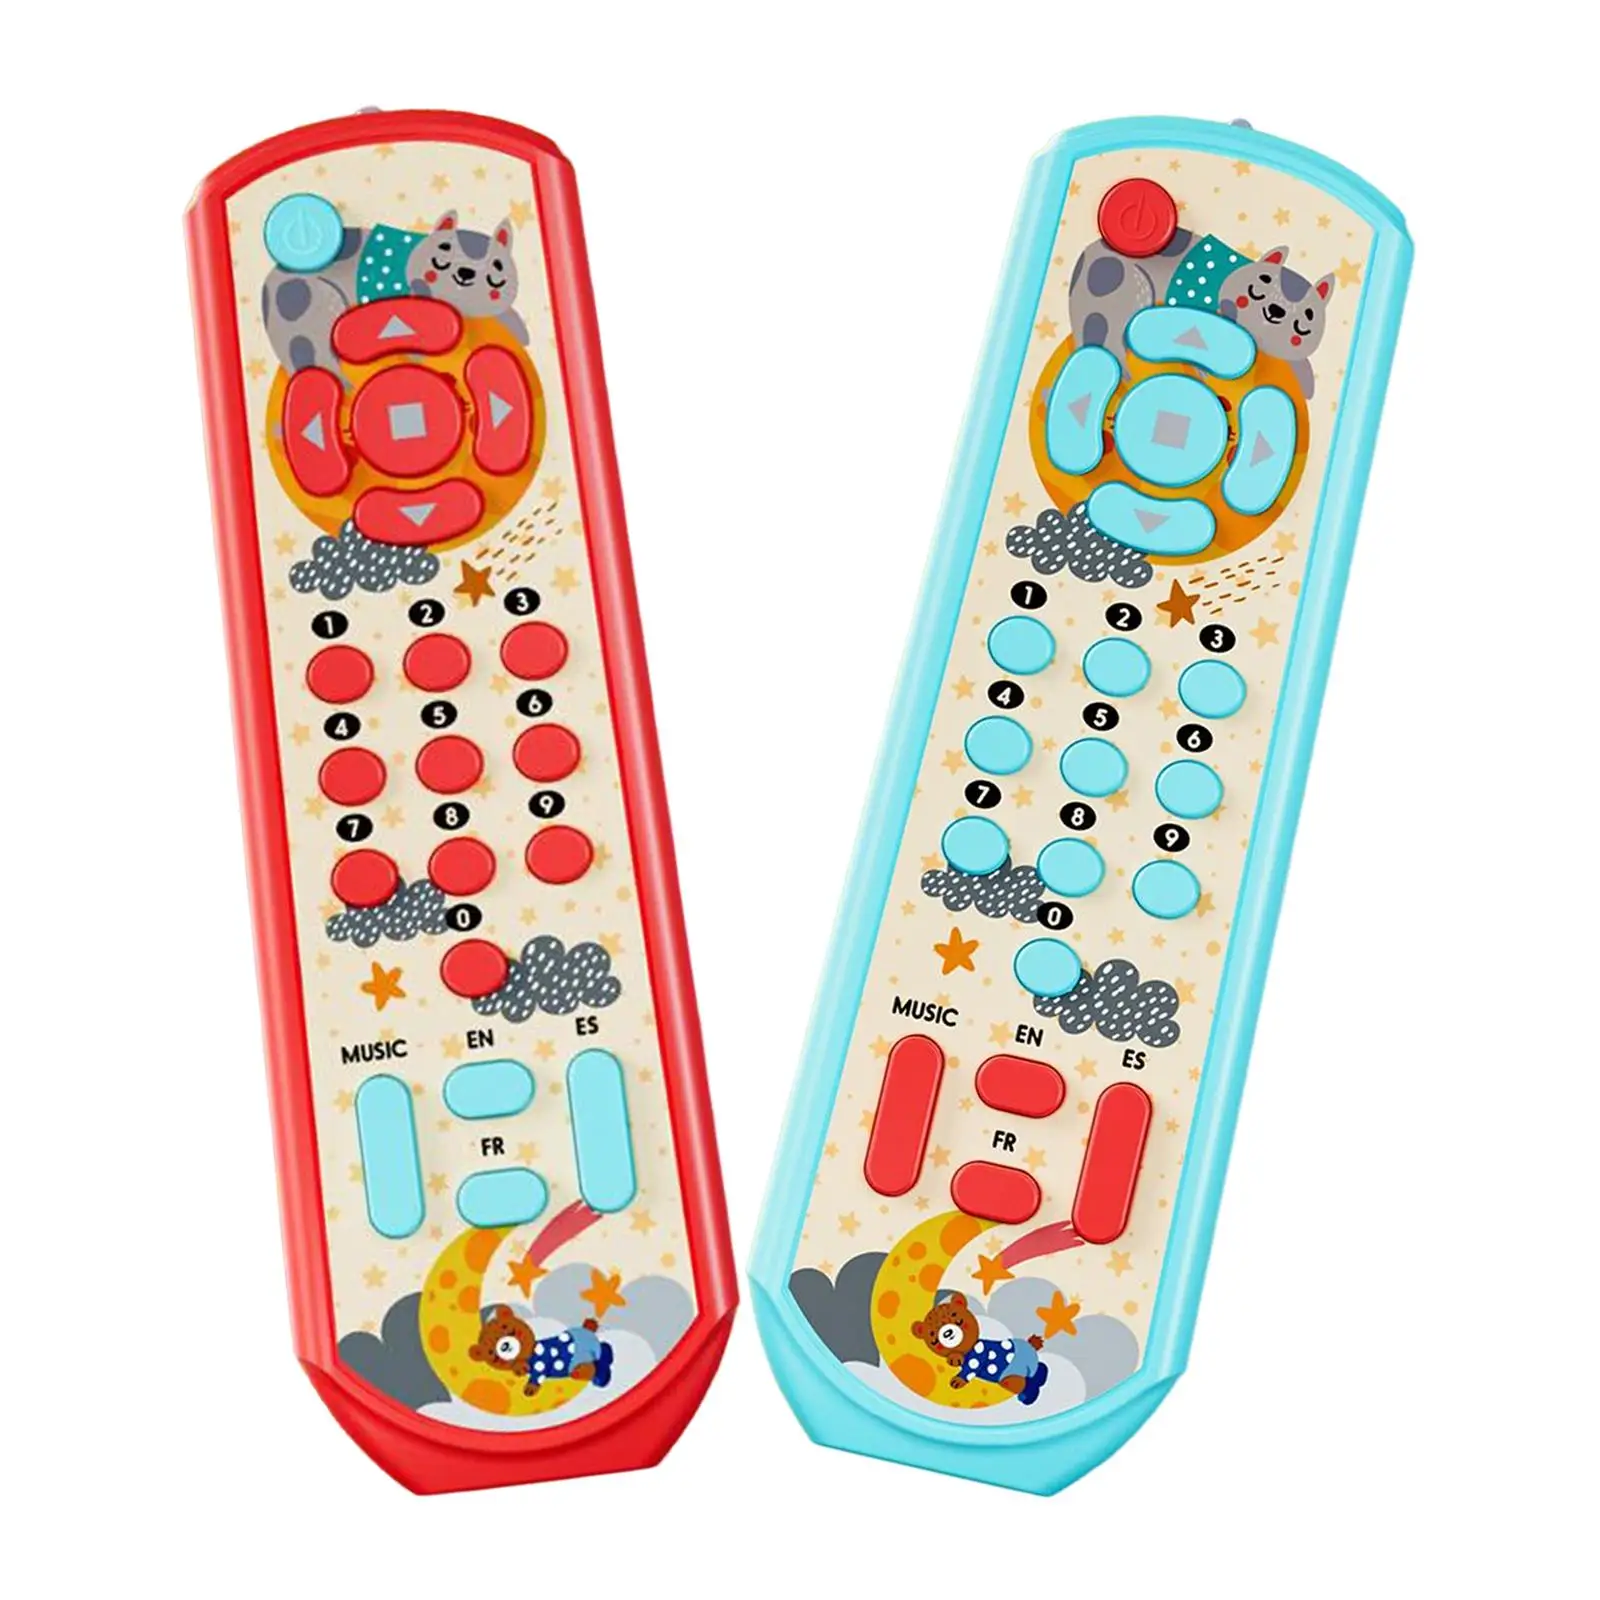 Remote Control Toys Music Education Toys Numbers Learning Machine Pretend Play with Sound for Baby Toddler Kids Children Gifts